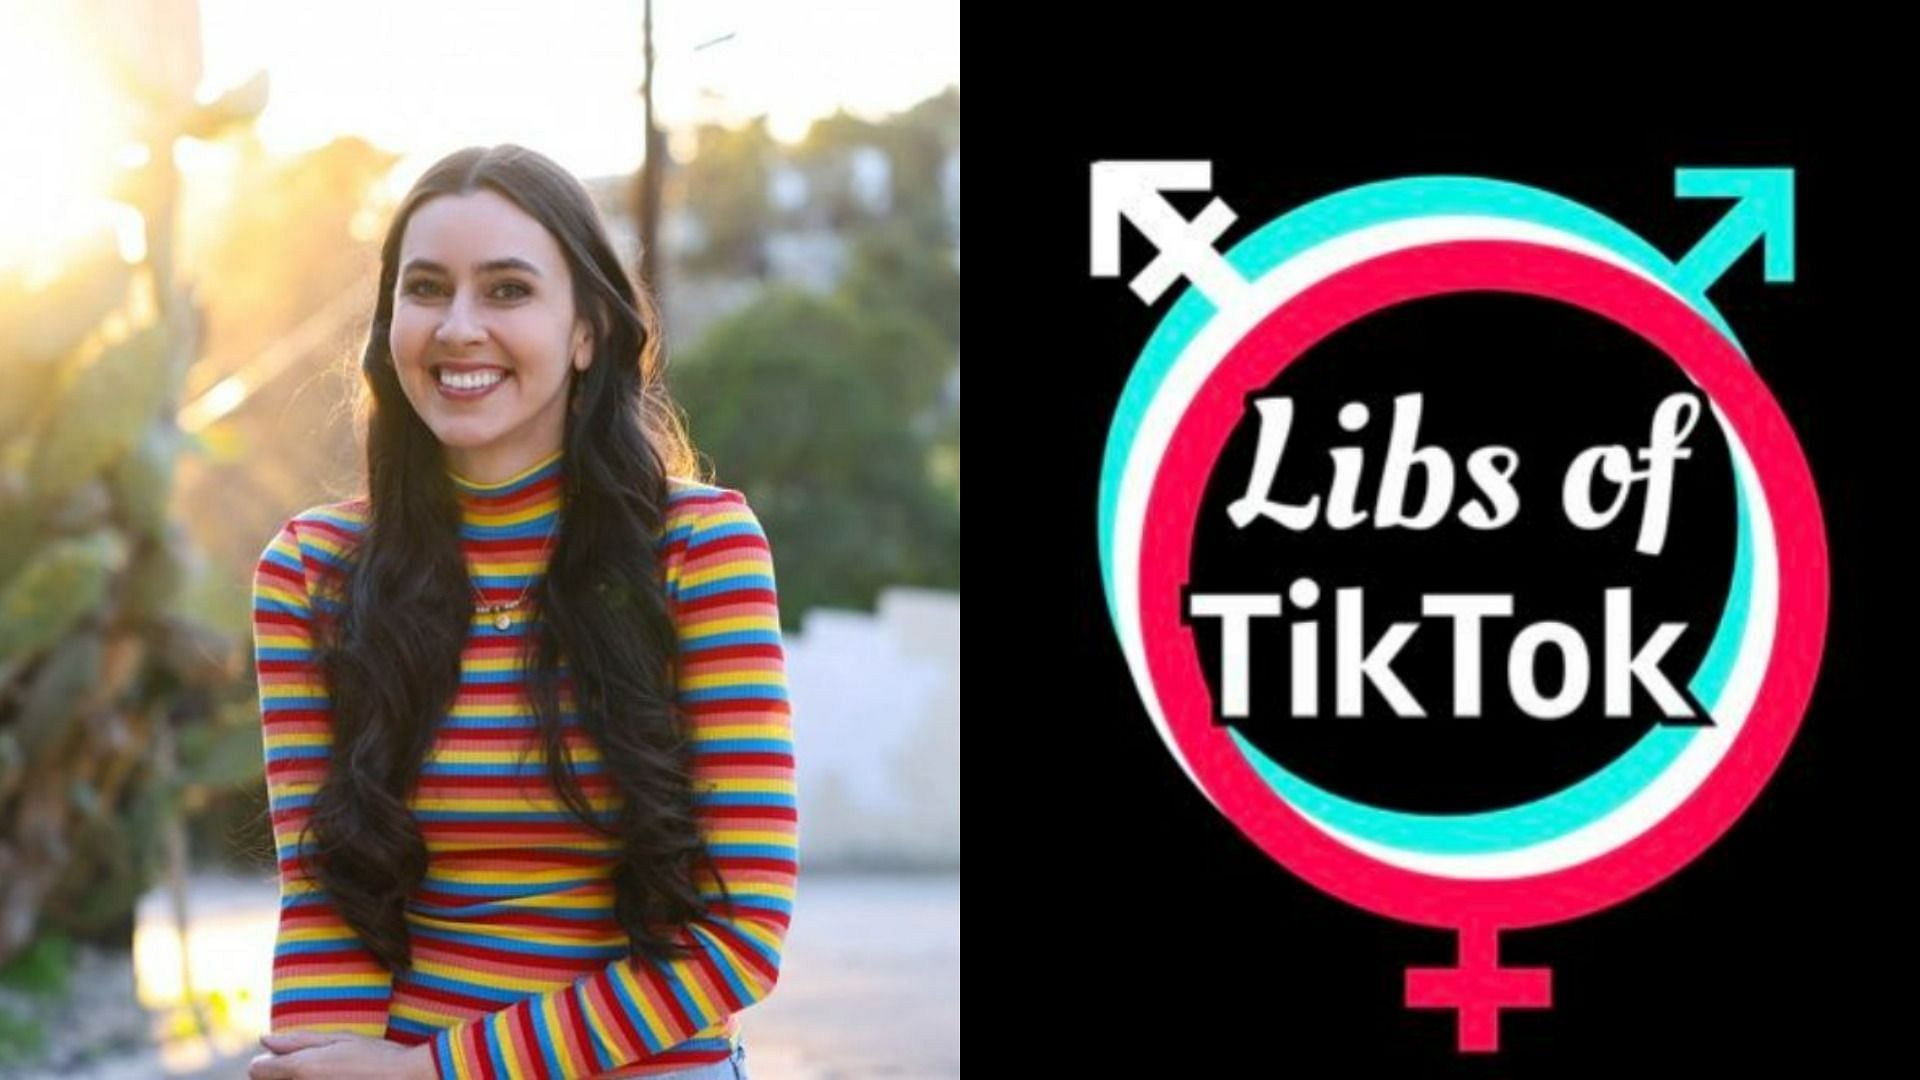 Taylor Lorenz receives backlash after &#039;doxxing&#039; Liberals of TikTok social media account (Image via Sara Kenigsberg and TheQuartering/Twitter)